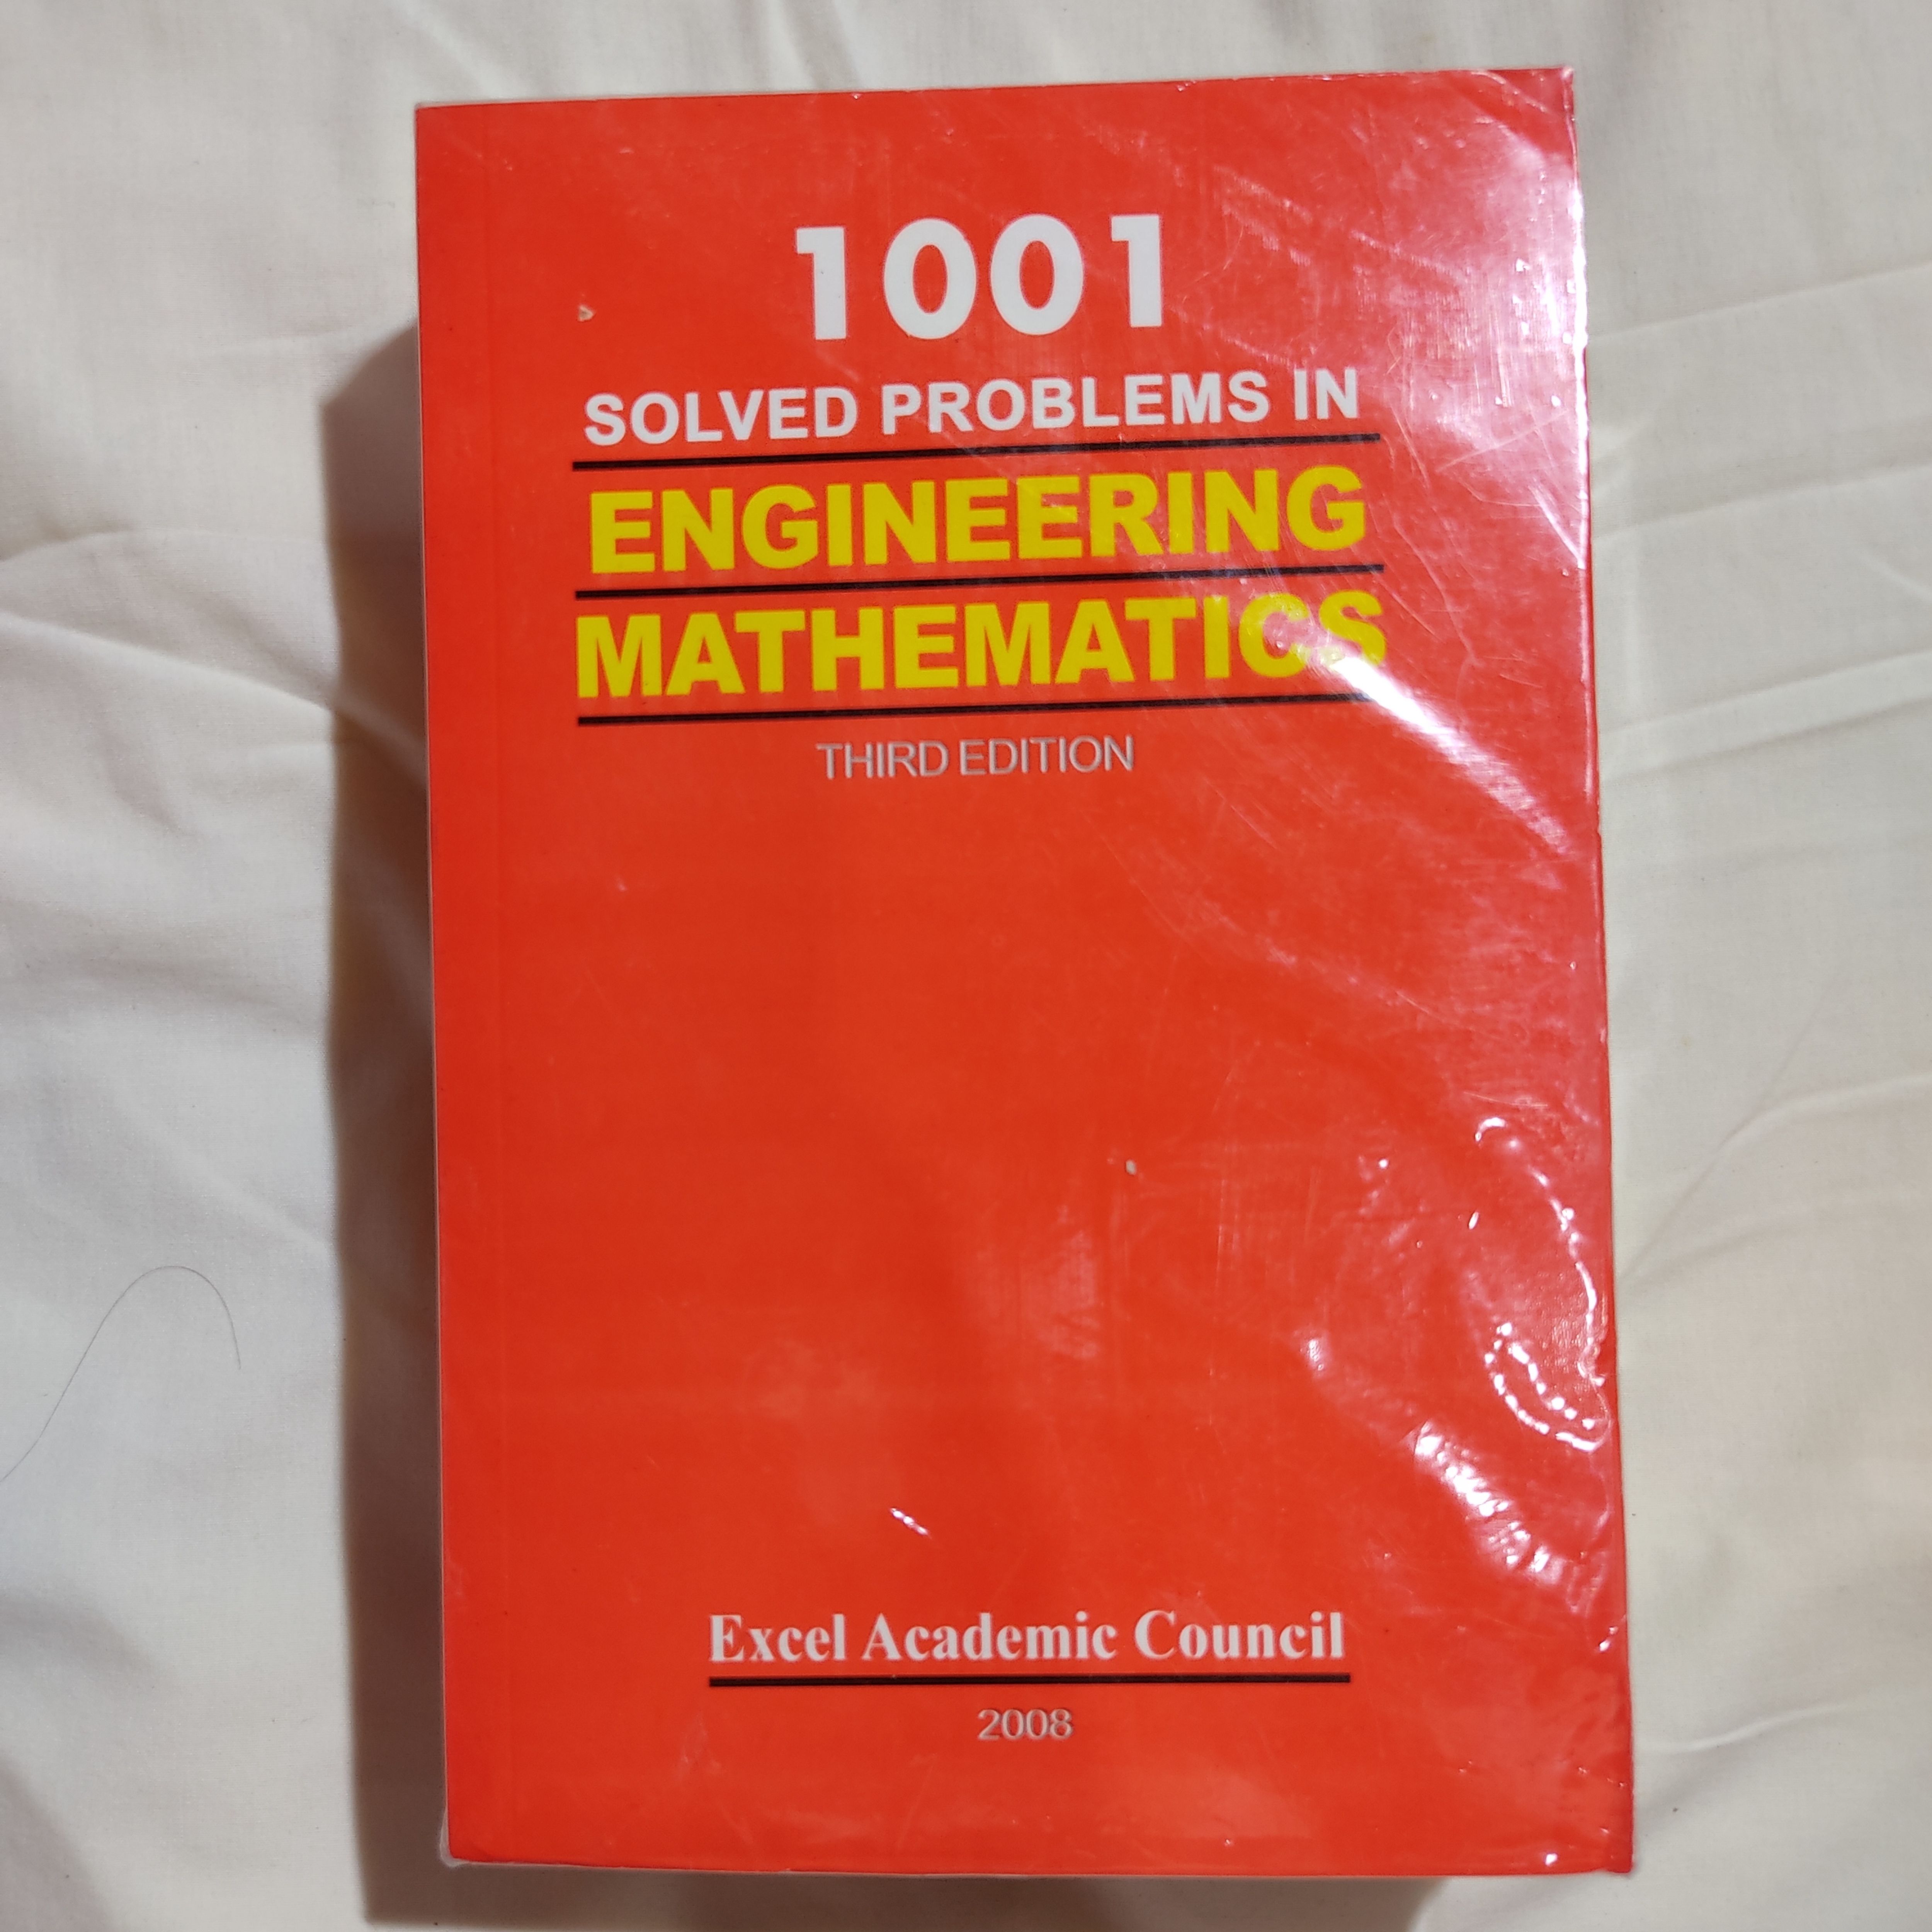 1001 solved problems in engineering mathematics pdf free download